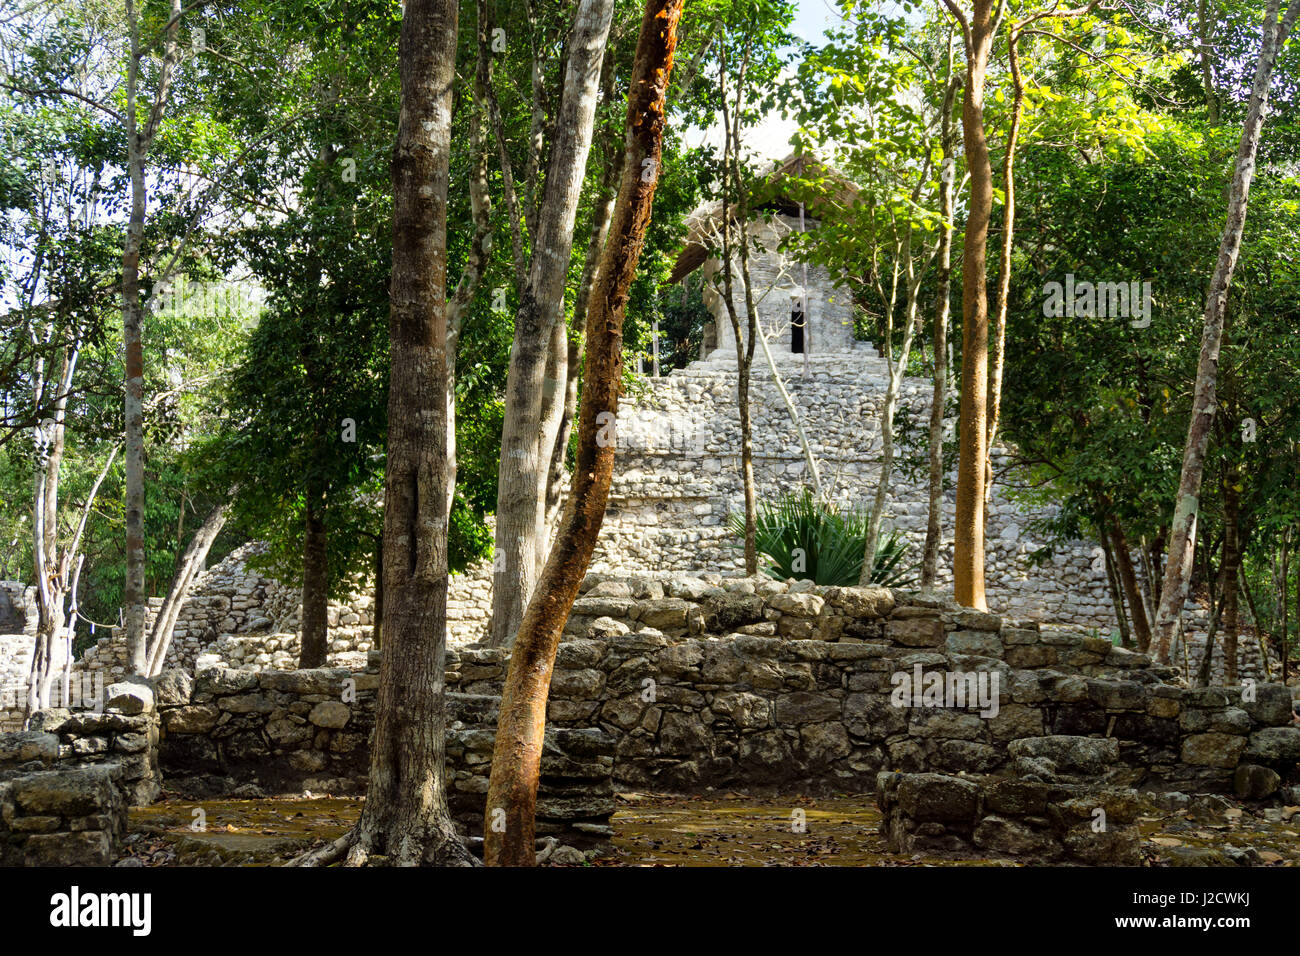 View of the Temple of the Paintings in the Mayan ruins of Coba, Mexico Stock Photo